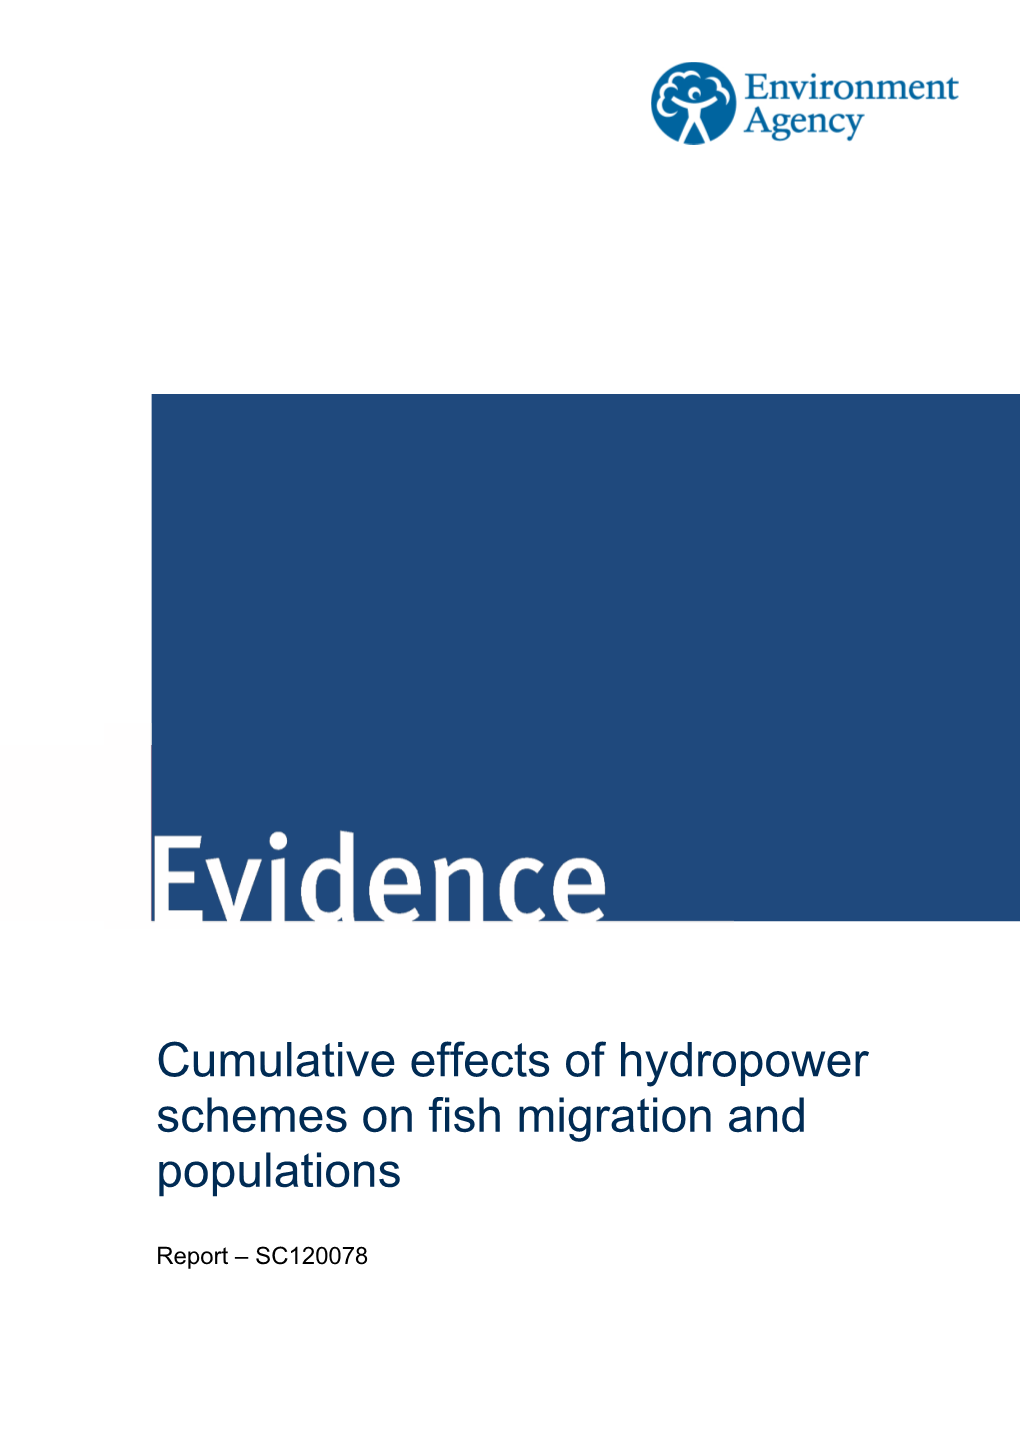 Cumulative Effects of Hydropower Schemes on Fish Migration and Populations